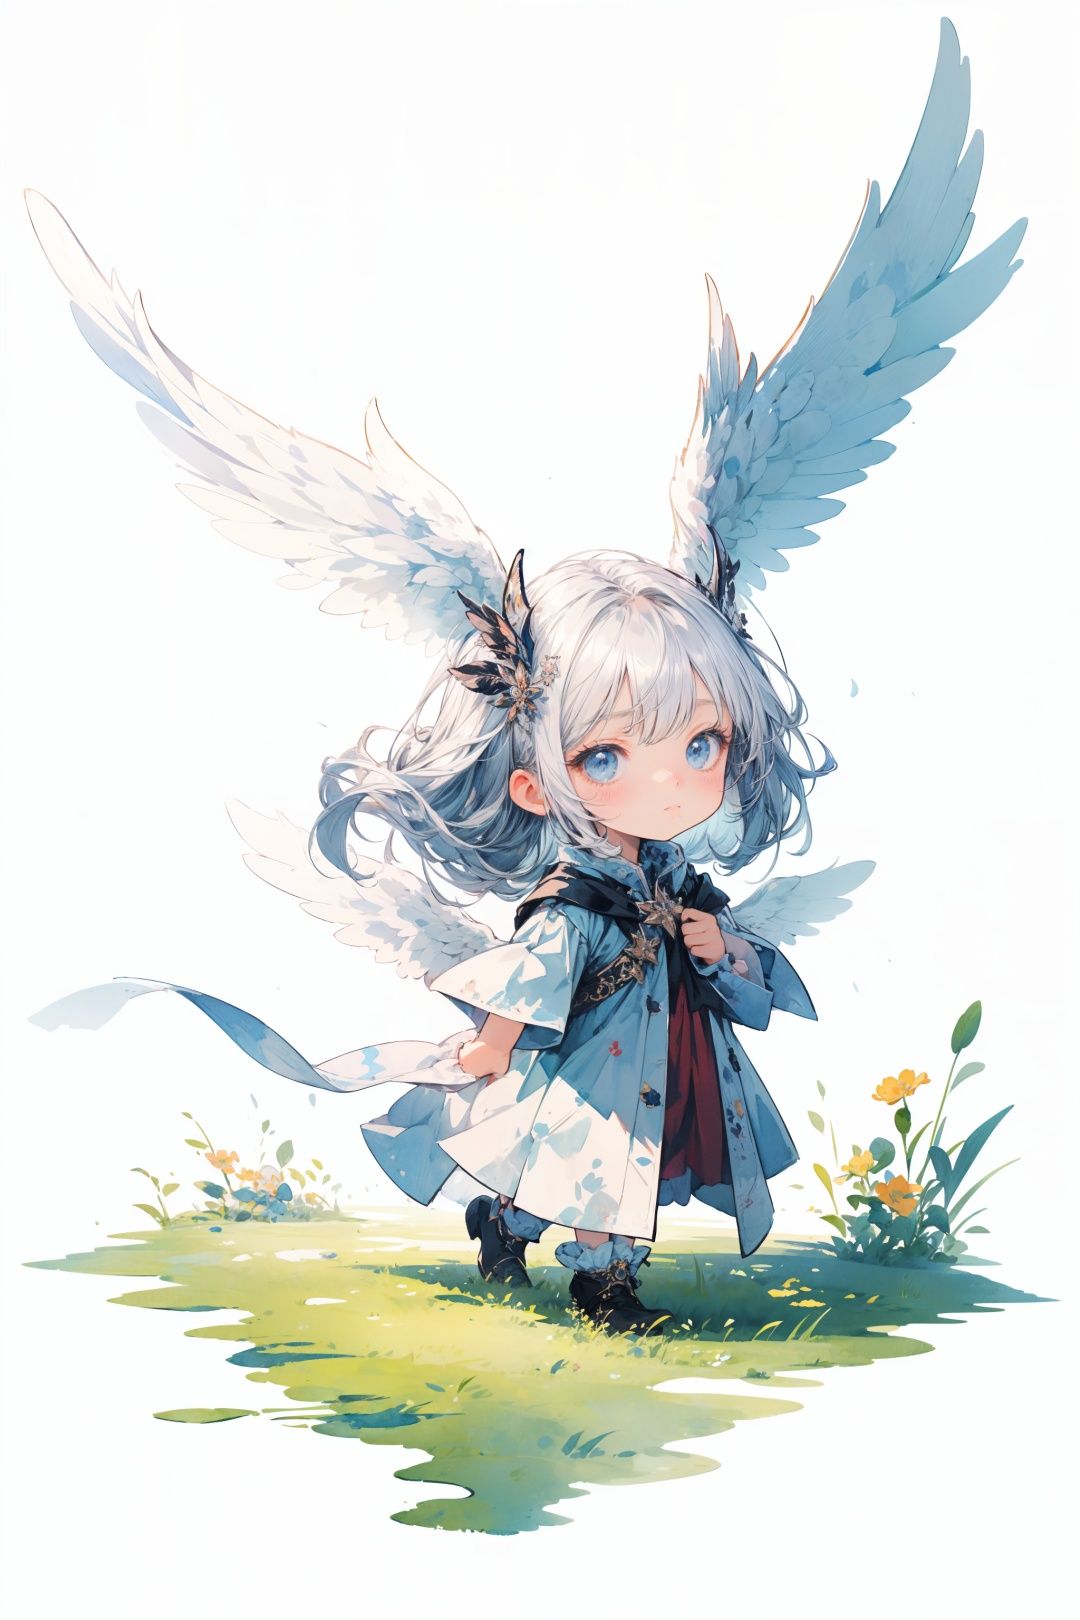 best quality,masterpiece,((simple background, blank background, pure white background)), (simple details),(minimalism:1.4), watercolor, chibi:2,den:2,(cute, sweet, fantasy),little angel girl:3,angel wings,long hairs,on grass,